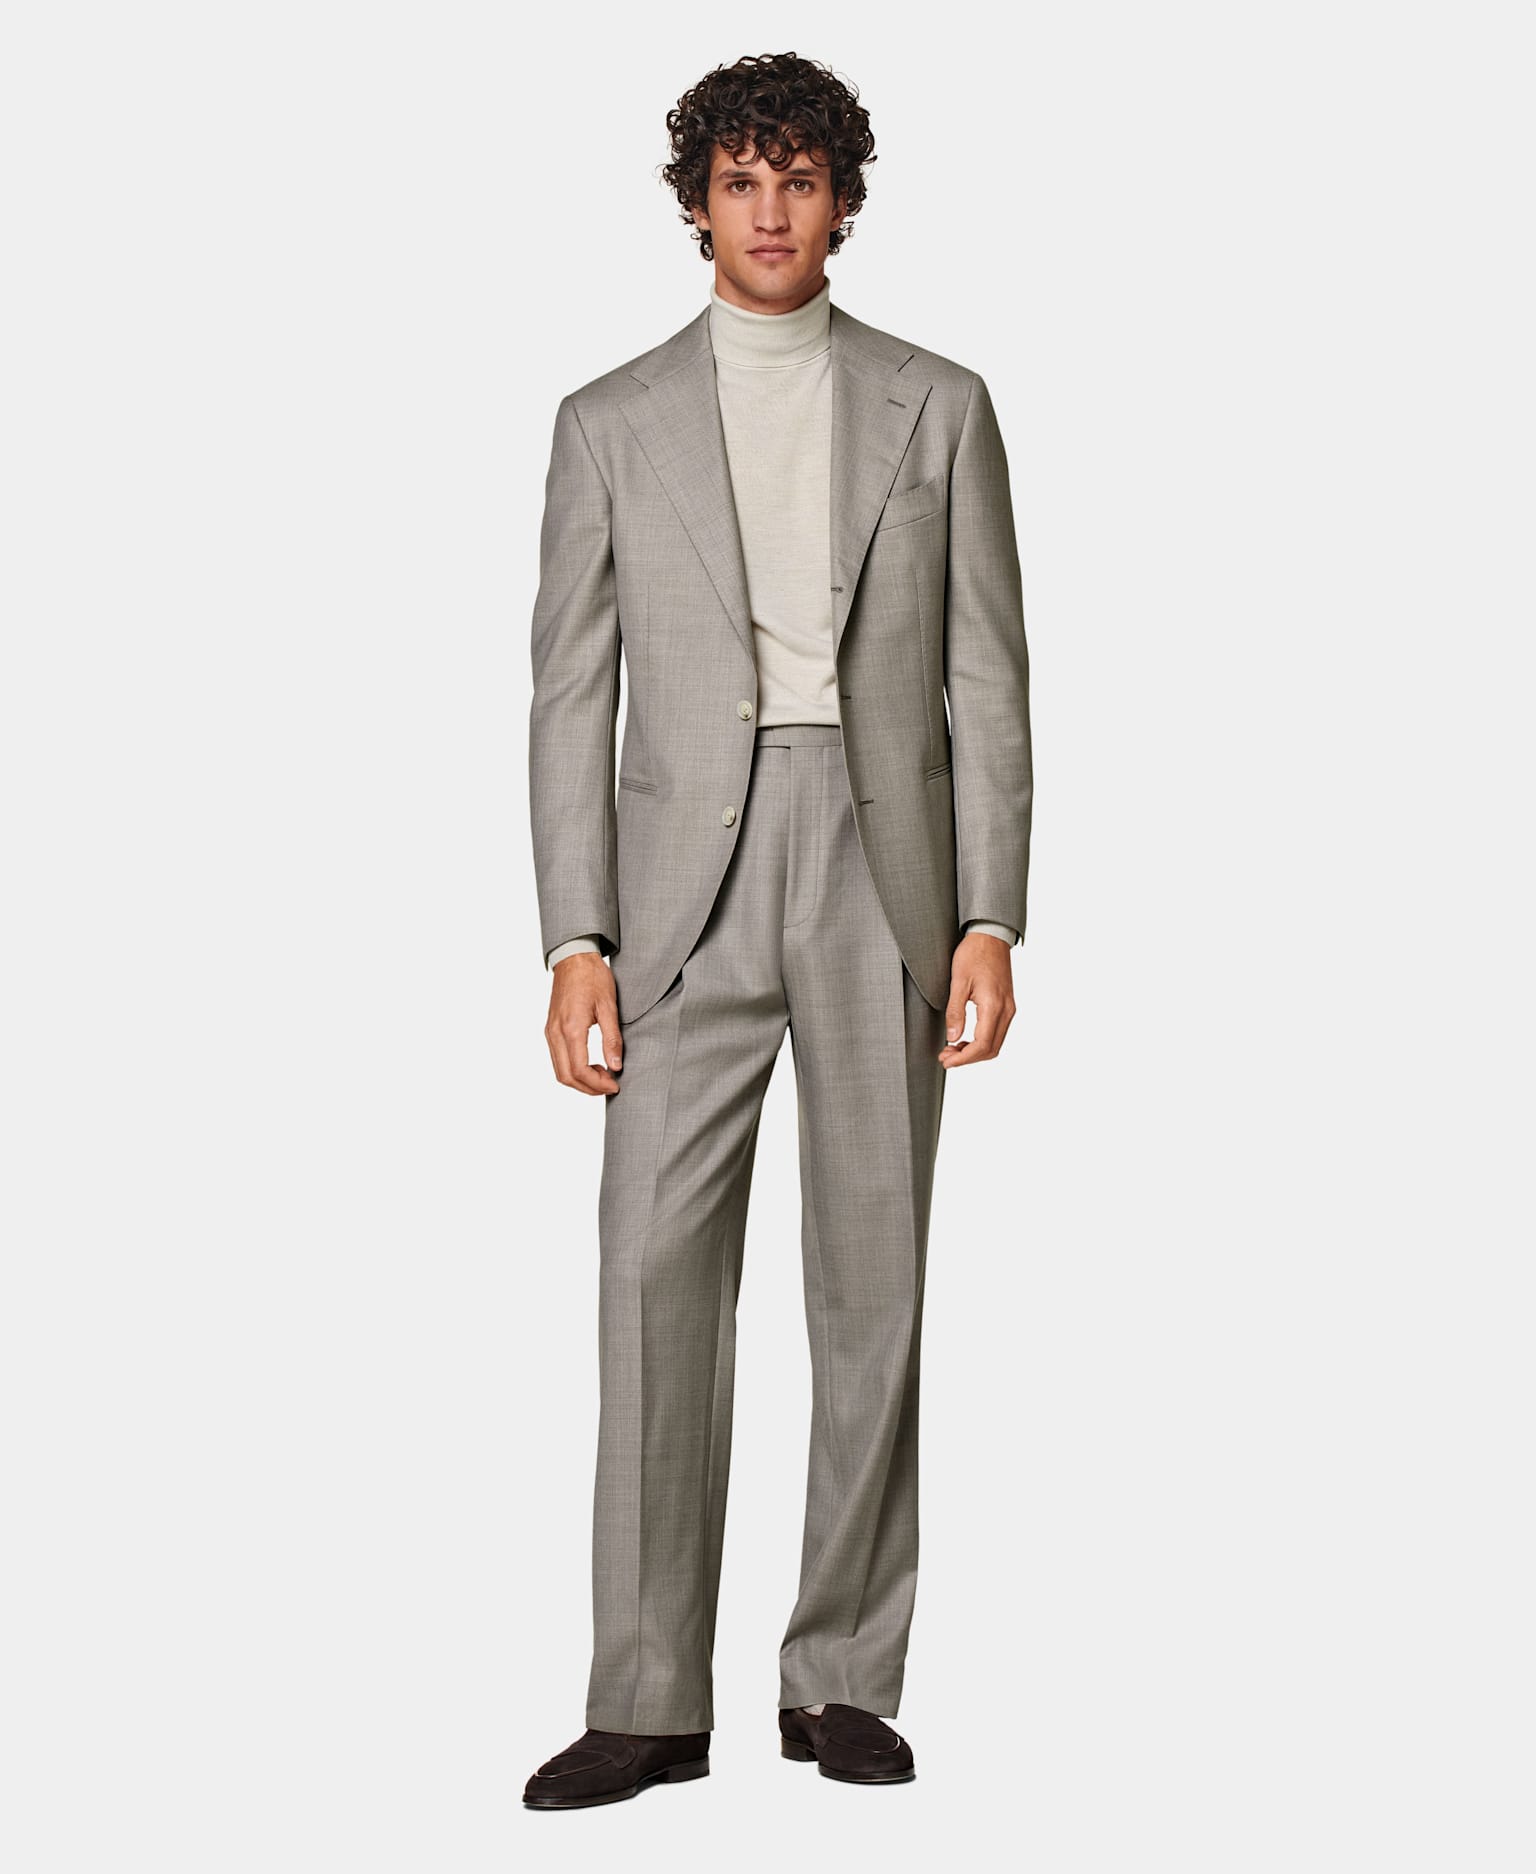 Taupe single-breasted suit with light taupe turtleneck.